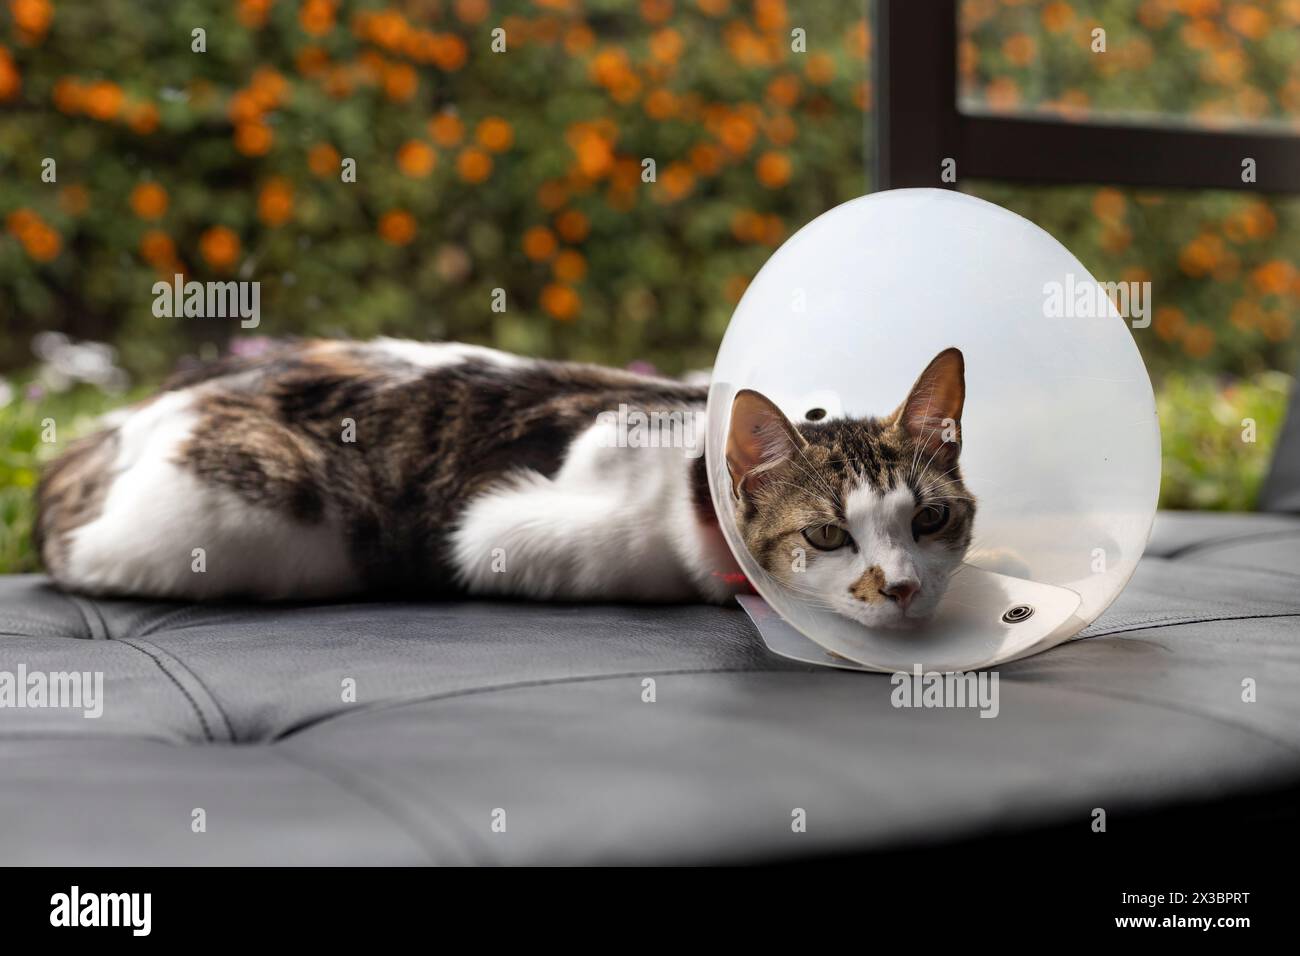 Sick cat lying down looking at camera with plastic collar on head Stock Photo